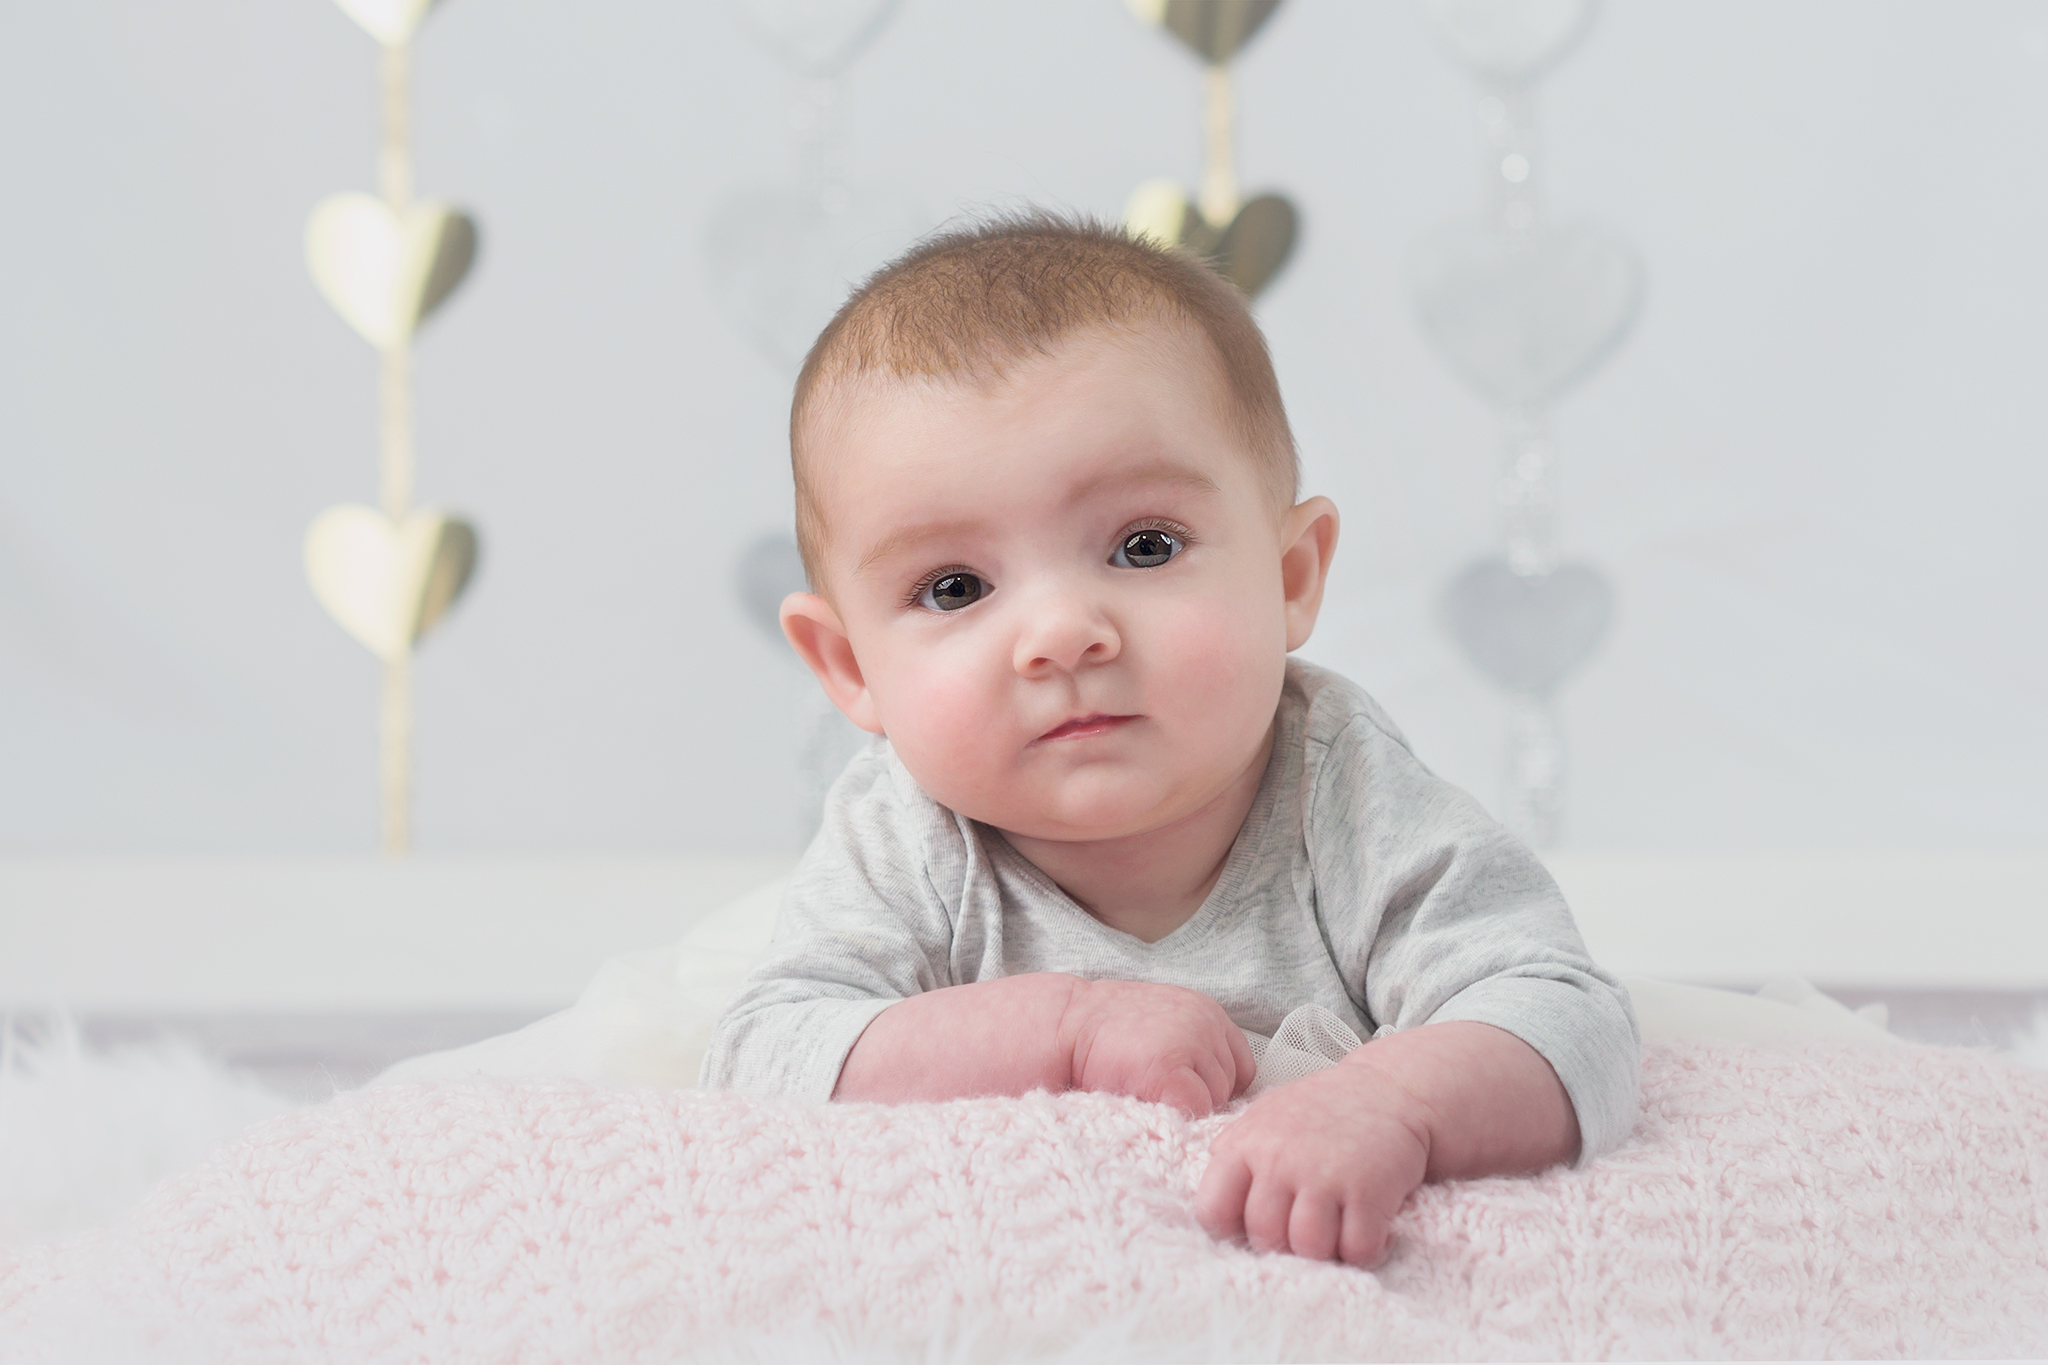 Sibling Session, Baby, Child, Family, Model, Photography, Session, Casi Ann Photography, studio, Valentine, Milestone, brother, sister, elementarty, school, preschool, 4 month, gold, silver, gray, black, white, flowers, ingleside, loves park, illinois, portrait, kids